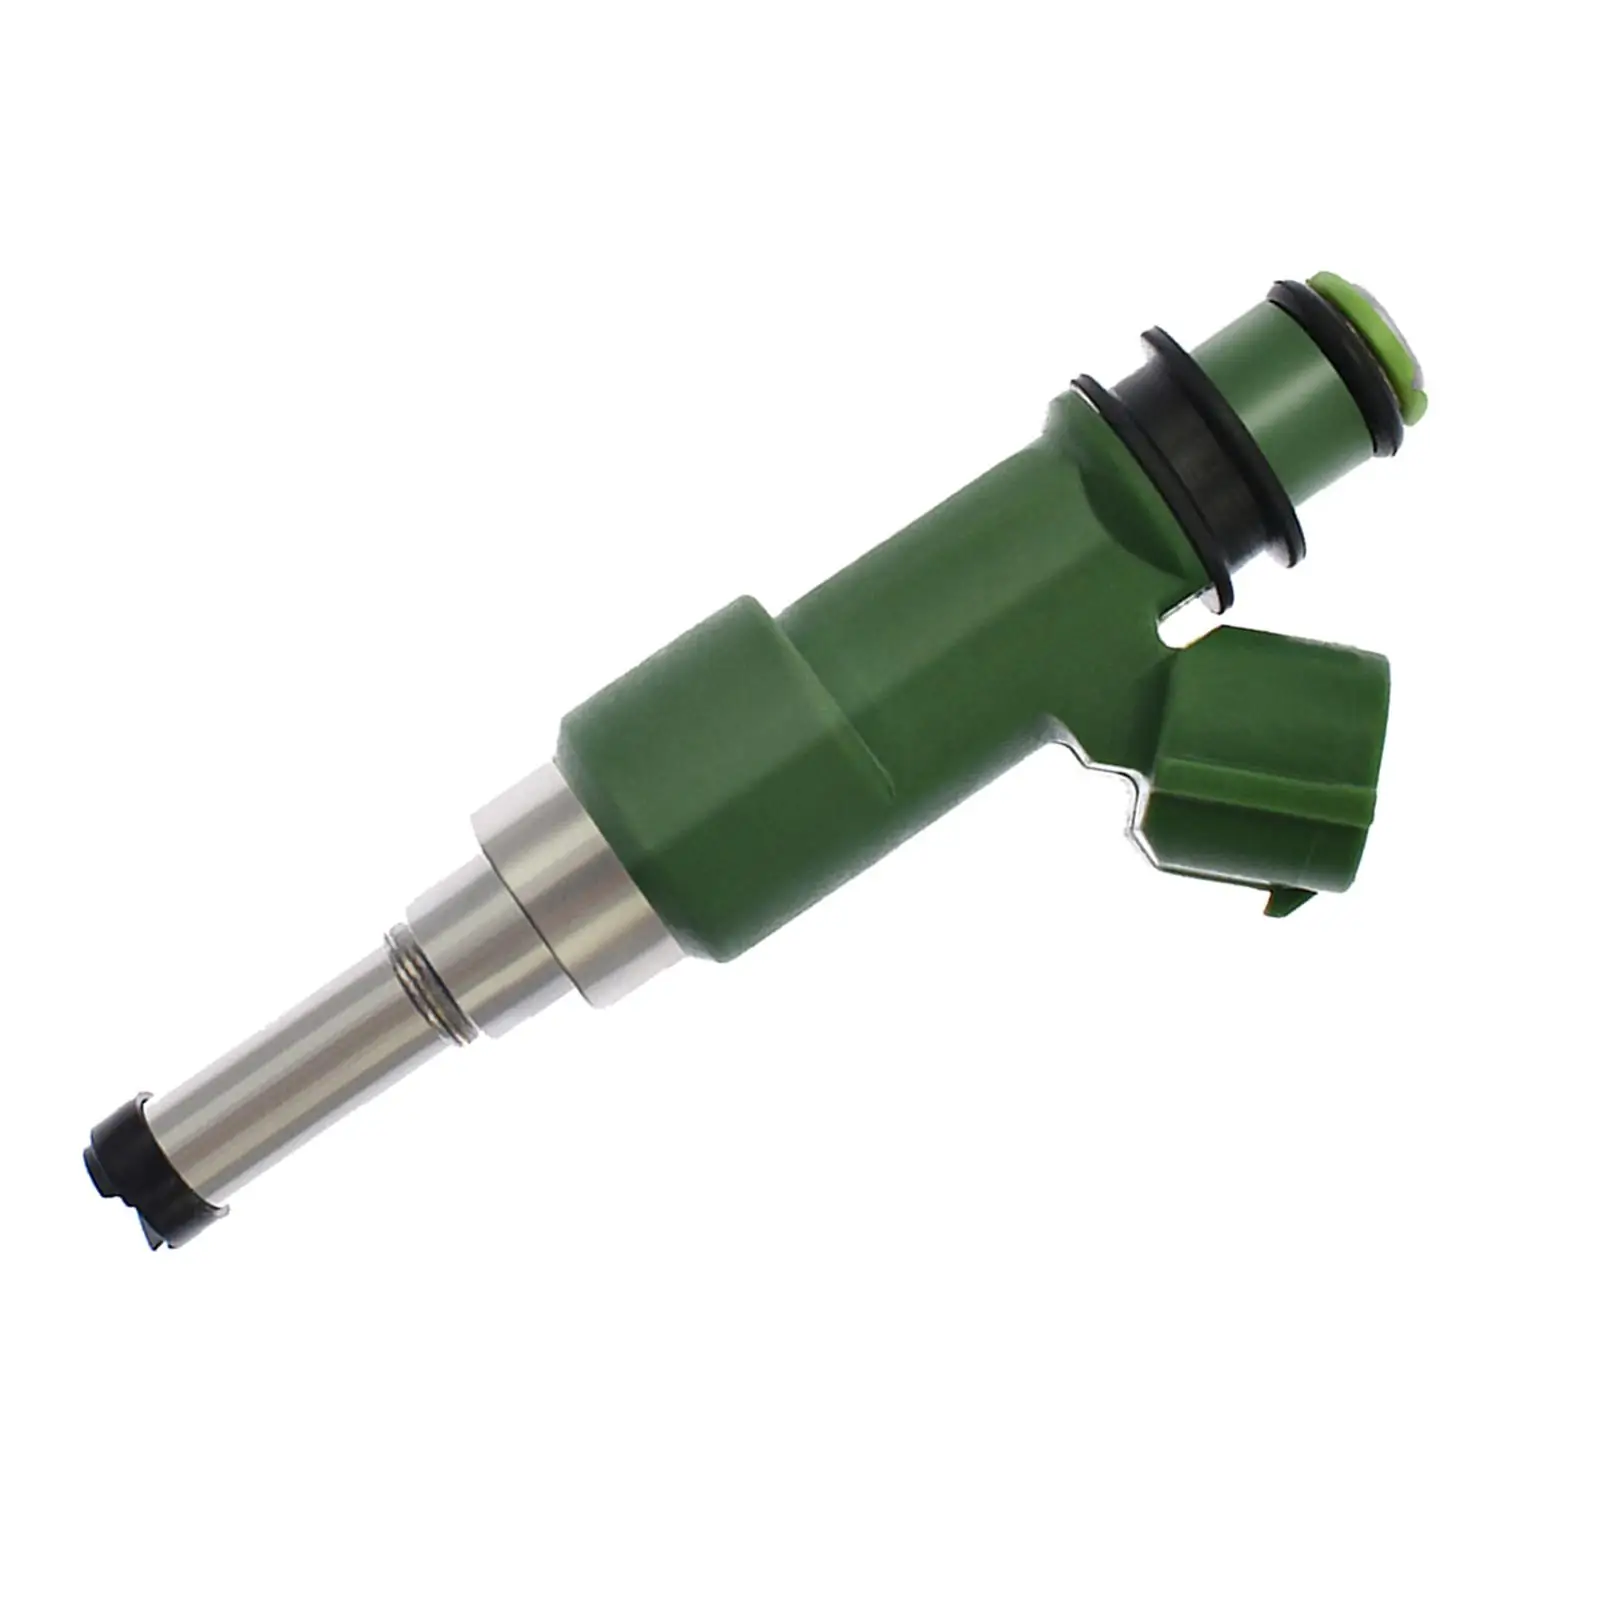 5VK137610000 Fuel Injector Nozzle Injection Injectors Fits for Yamaha Raptor 700 XT660 Yfm700 Auto Parts Replaces